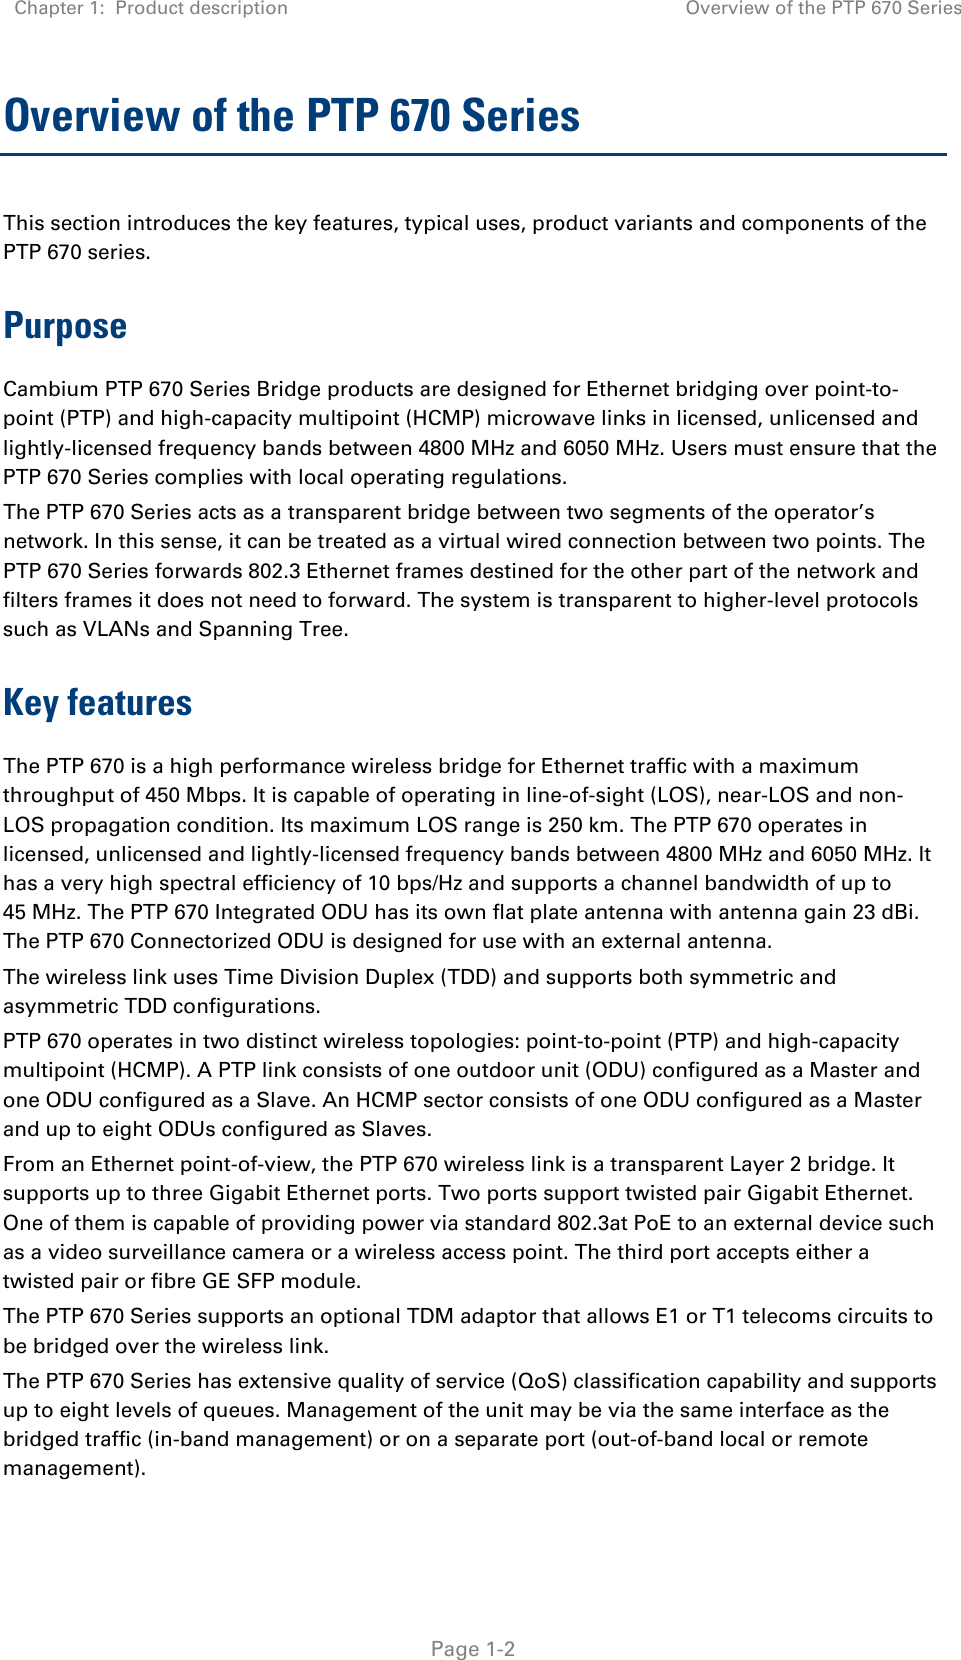 Chapter 1:  Product description Overview of the PTP 670 Series   Page 1-2 Overview of the PTP 670 Series This section introduces the key features, typical uses, product variants and components of the PTP 670 series. Purpose Cambium PTP 670 Series Bridge products are designed for Ethernet bridging over point-to-point (PTP) and high-capacity multipoint (HCMP) microwave links in licensed, unlicensed and lightly-licensed frequency bands between 4800 MHz and 6050 MHz. Users must ensure that the PTP 670 Series complies with local operating regulations. The PTP 670 Series acts as a transparent bridge between two segments of the operator’s network. In this sense, it can be treated as a virtual wired connection between two points. The PTP 670 Series forwards 802.3 Ethernet frames destined for the other part of the network and filters frames it does not need to forward. The system is transparent to higher-level protocols such as VLANs and Spanning Tree. Key features The PTP 670 is a high performance wireless bridge for Ethernet traffic with a maximum throughput of 450 Mbps. It is capable of operating in line-of-sight (LOS), near-LOS and non-LOS propagation condition. Its maximum LOS range is 250 km. The PTP 670 operates in licensed, unlicensed and lightly-licensed frequency bands between 4800 MHz and 6050 MHz. It has a very high spectral efficiency of 10 bps/Hz and supports a channel bandwidth of up to 45 MHz. The PTP 670 Integrated ODU has its own flat plate antenna with antenna gain 23 dBi. The PTP 670 Connectorized ODU is designed for use with an external antenna. The wireless link uses Time Division Duplex (TDD) and supports both symmetric and asymmetric TDD configurations. PTP 670 operates in two distinct wireless topologies: point-to-point (PTP) and high-capacity multipoint (HCMP). A PTP link consists of one outdoor unit (ODU) configured as a Master and one ODU configured as a Slave. An HCMP sector consists of one ODU configured as a Master and up to eight ODUs configured as Slaves. From an Ethernet point-of-view, the PTP 670 wireless link is a transparent Layer 2 bridge. It supports up to three Gigabit Ethernet ports. Two ports support twisted pair Gigabit Ethernet. One of them is capable of providing power via standard 802.3at PoE to an external device such as a video surveillance camera or a wireless access point. The third port accepts either a twisted pair or fibre GE SFP module. The PTP 670 Series supports an optional TDM adaptor that allows E1 or T1 telecoms circuits to be bridged over the wireless link.  The PTP 670 Series has extensive quality of service (QoS) classification capability and supports up to eight levels of queues. Management of the unit may be via the same interface as the bridged traffic (in-band management) or on a separate port (out-of-band local or remote management). 